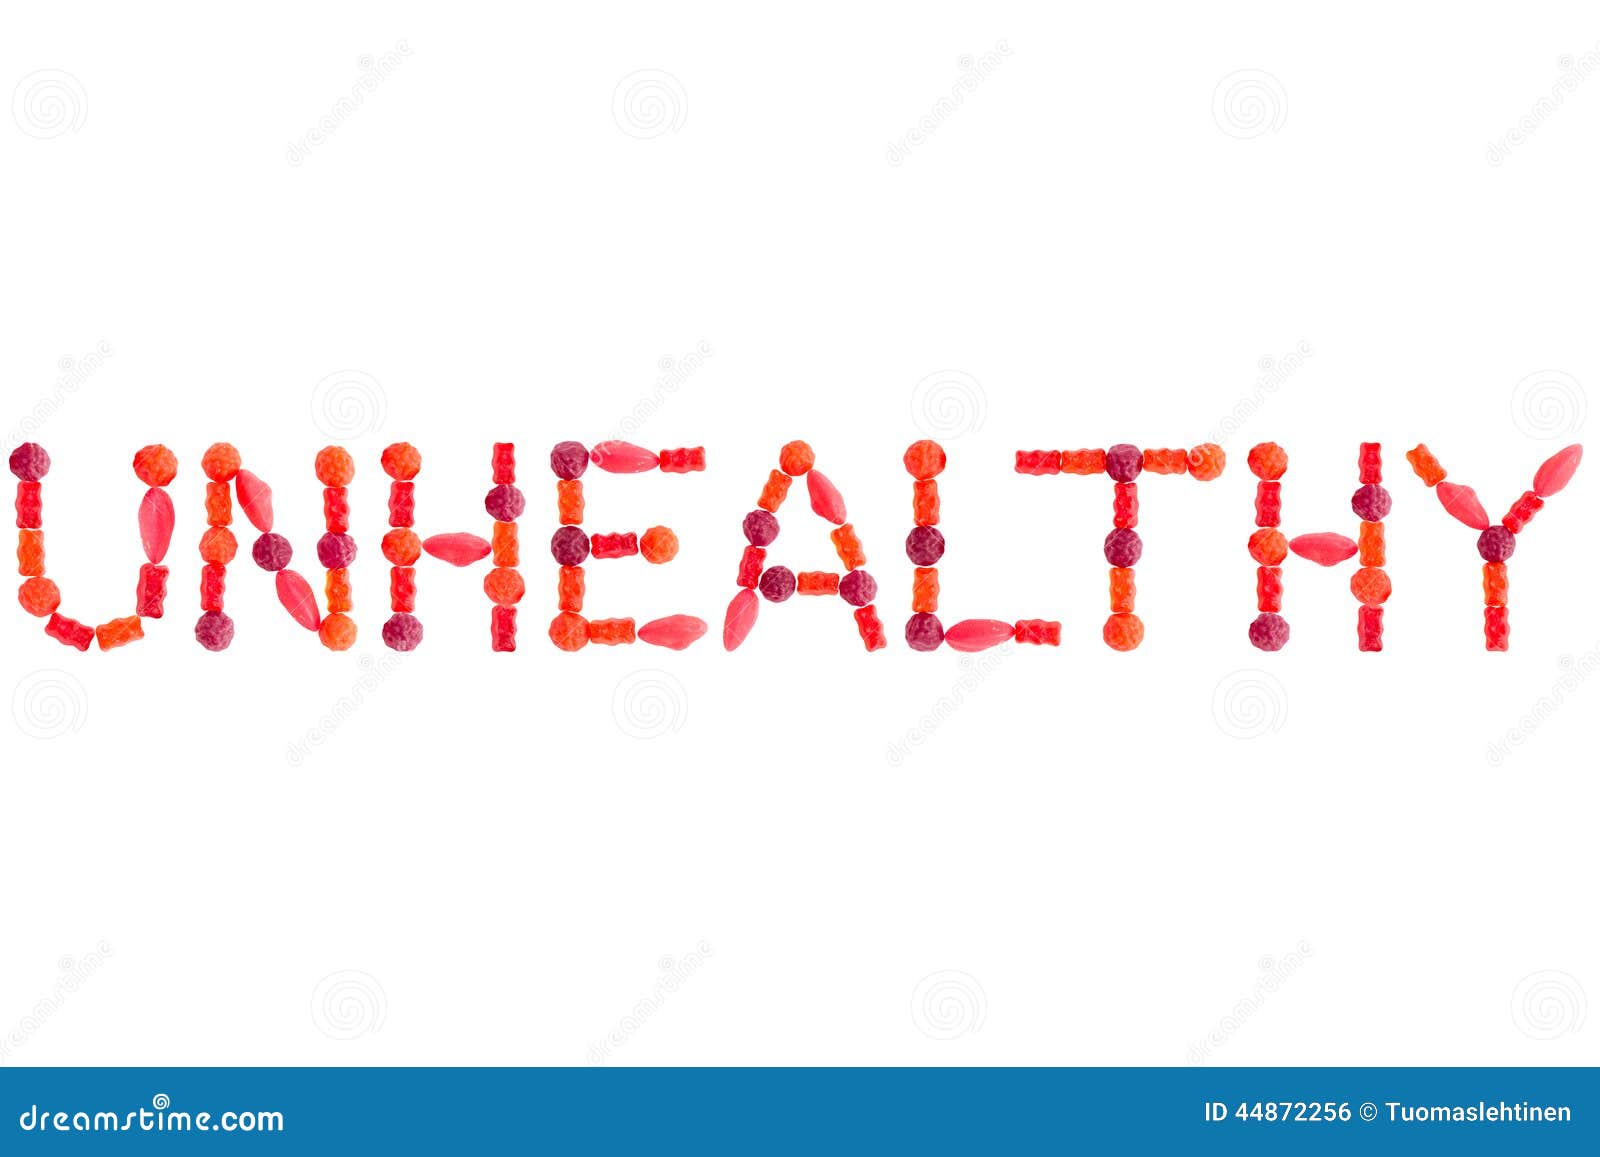 httpsstock photo word unhealthy made red sugary candies isolated white background image44872256